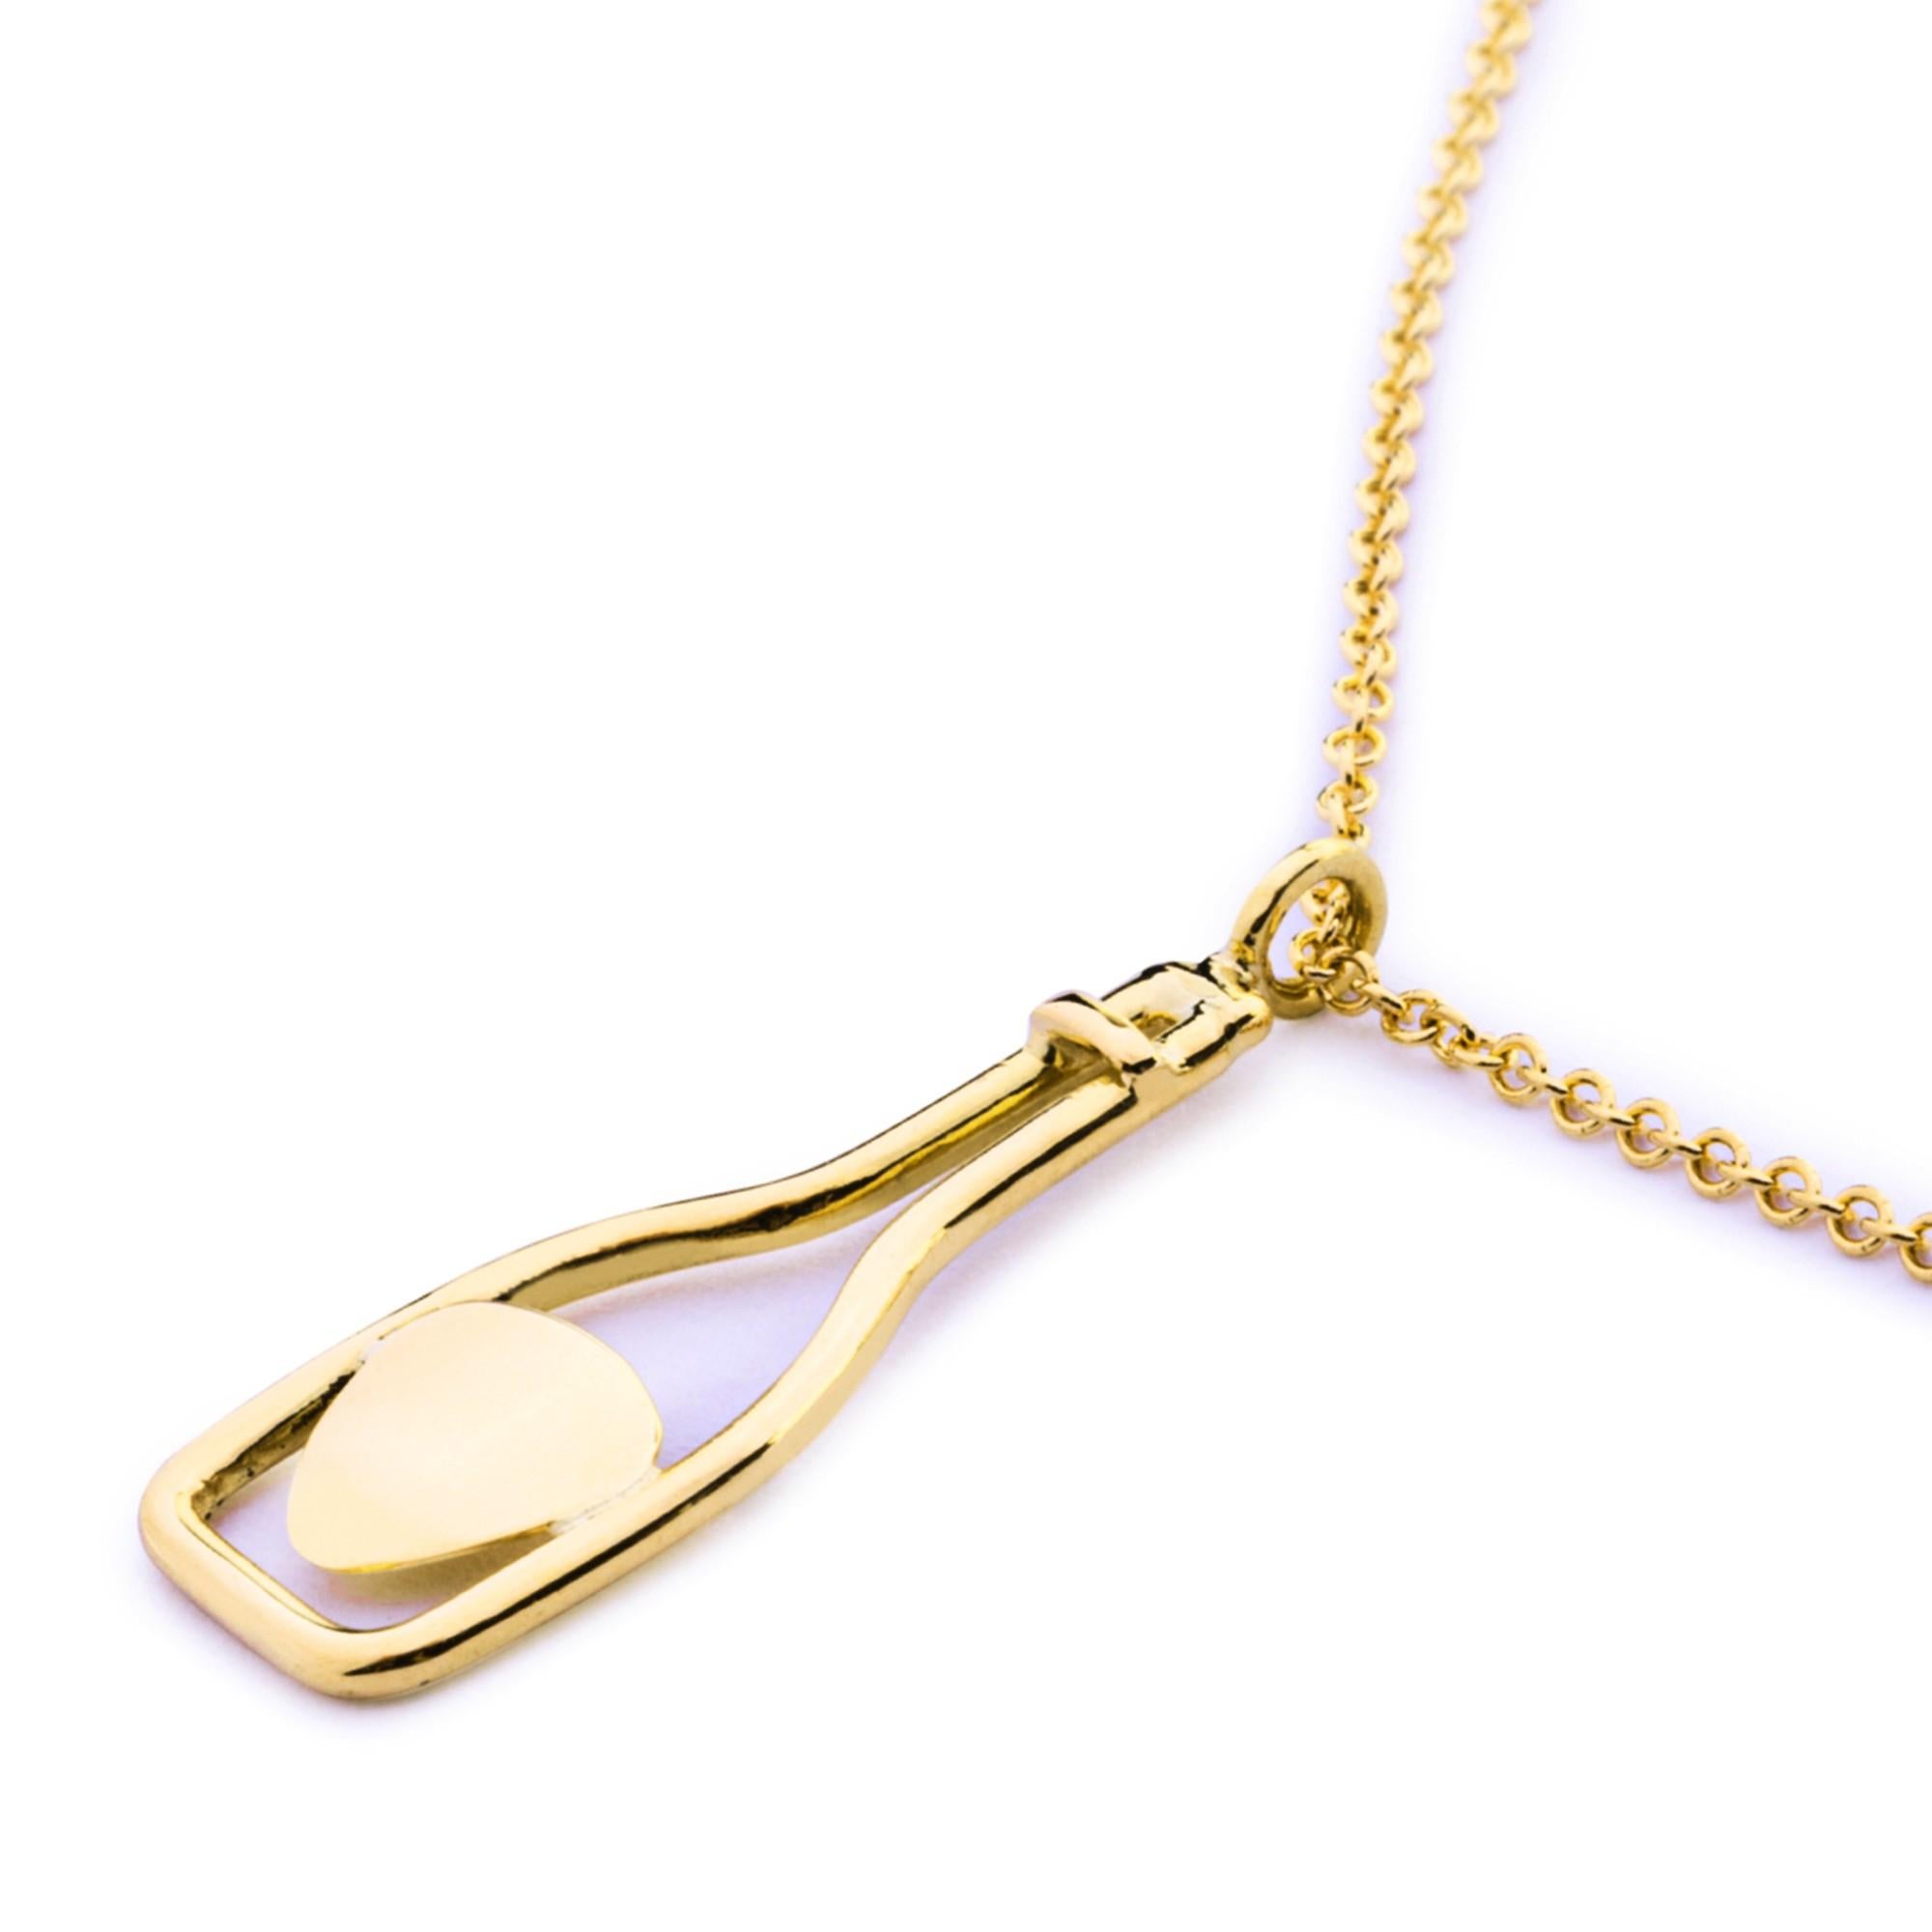 Alex Jona Champagne Bottle 18 Karat Yellow Gold Pendent Necklace In New Condition For Sale In Torino, IT